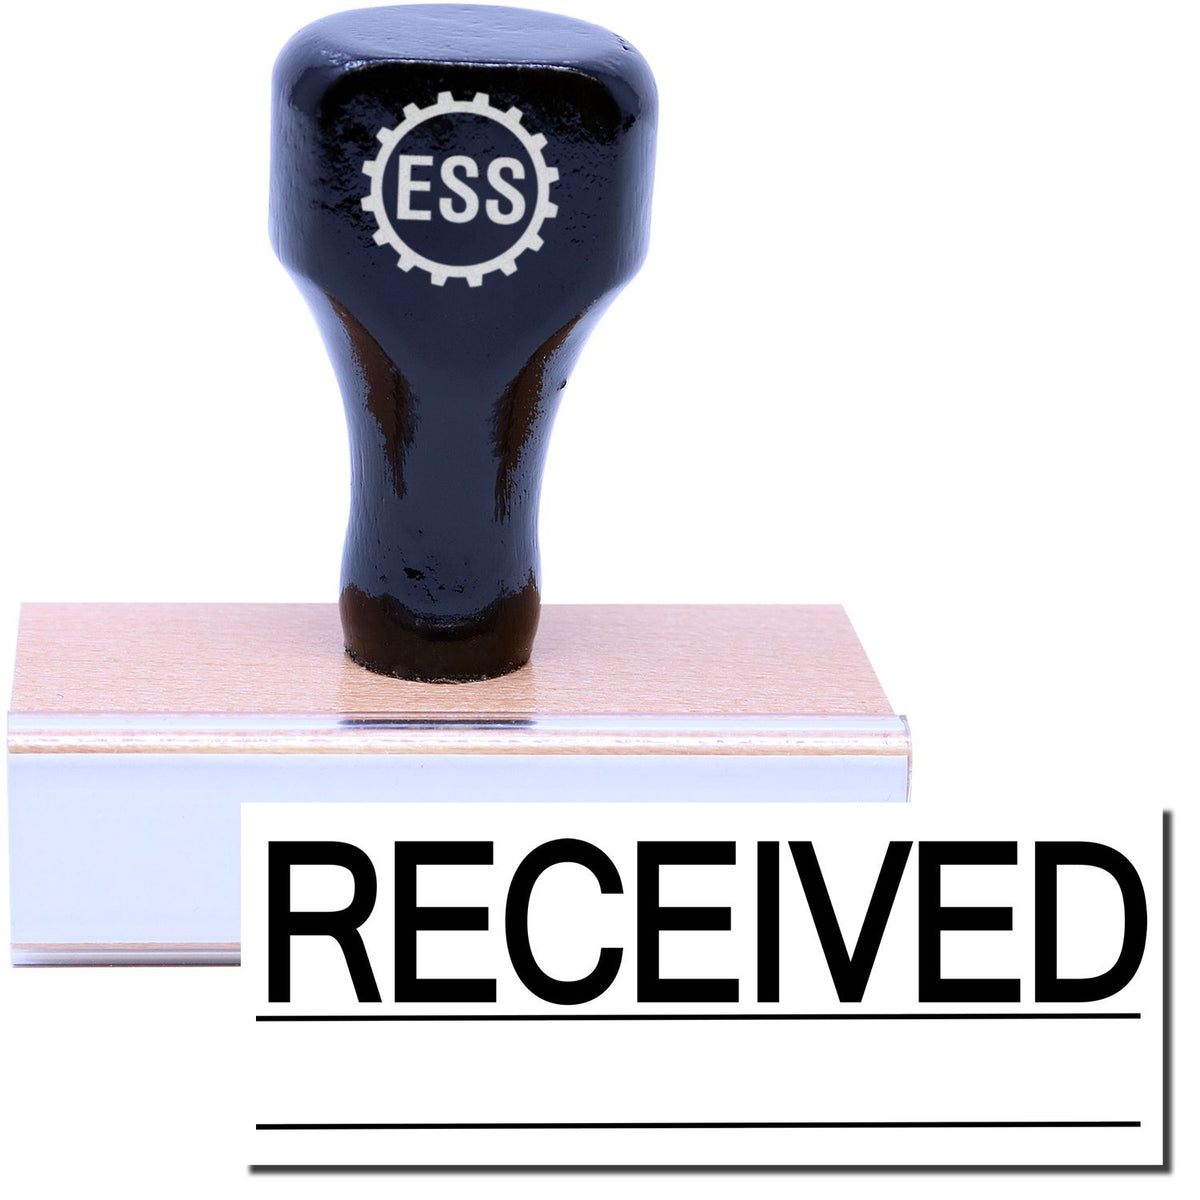 A stock office rubber stamp with a stamped image showing how the text &quot;RECEIVED&quot; in a large font with a line underneath the text is displayed after stamping.